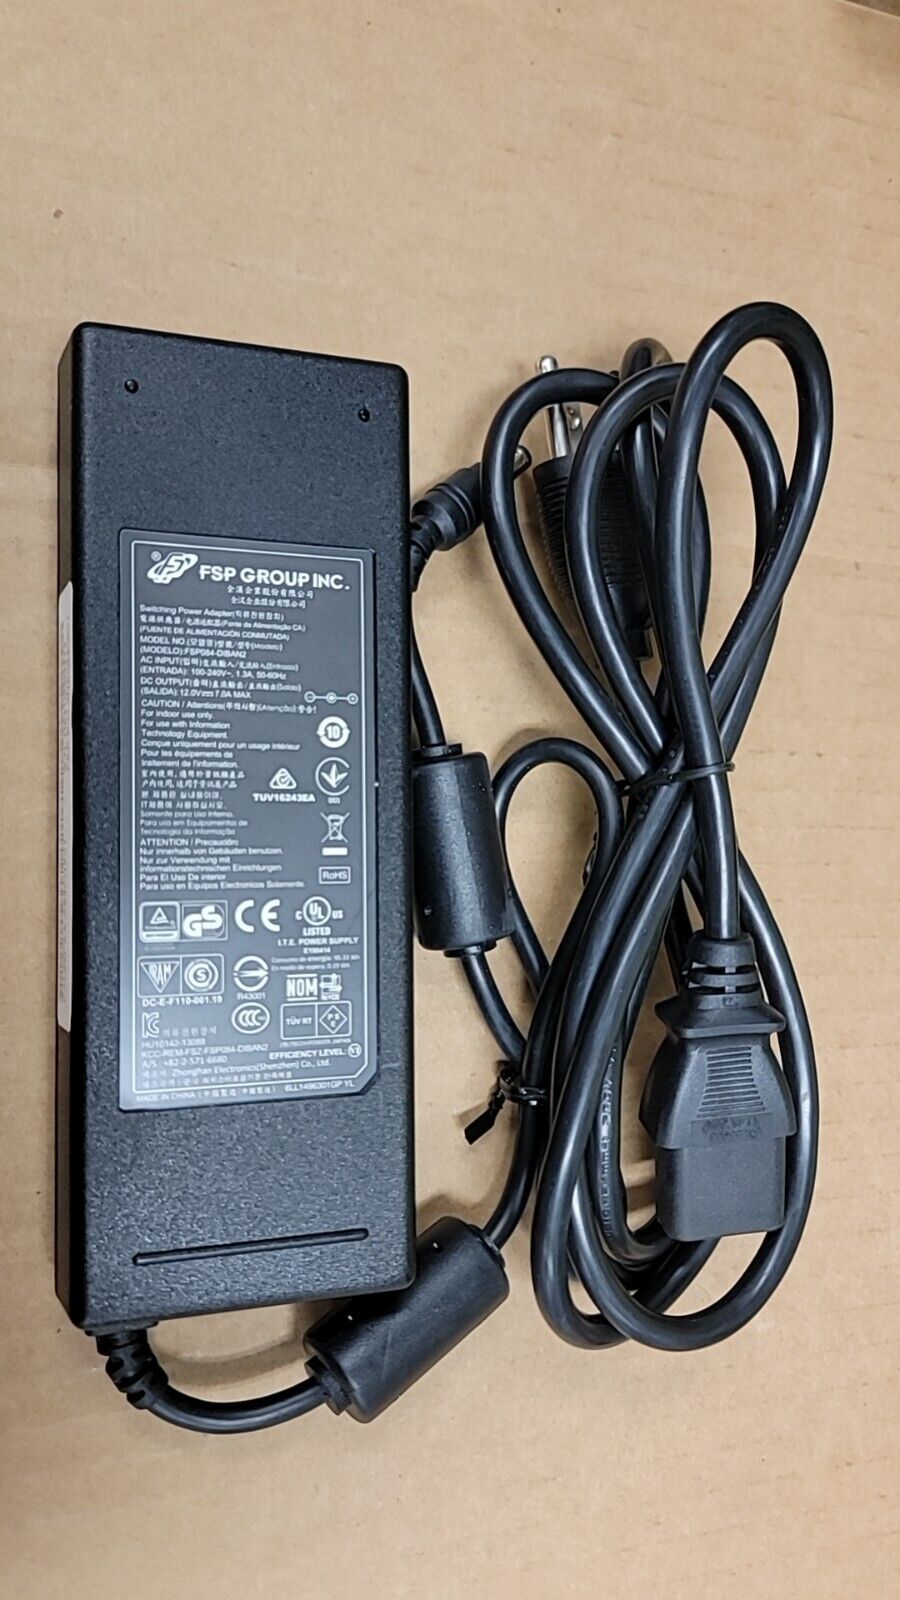 Original FSP FSP084-DIBAN2 AC Switching Power Adapter 12V 7A 84W W/ P. Cord Brand FSP Type Adapter Connection Split/Dup